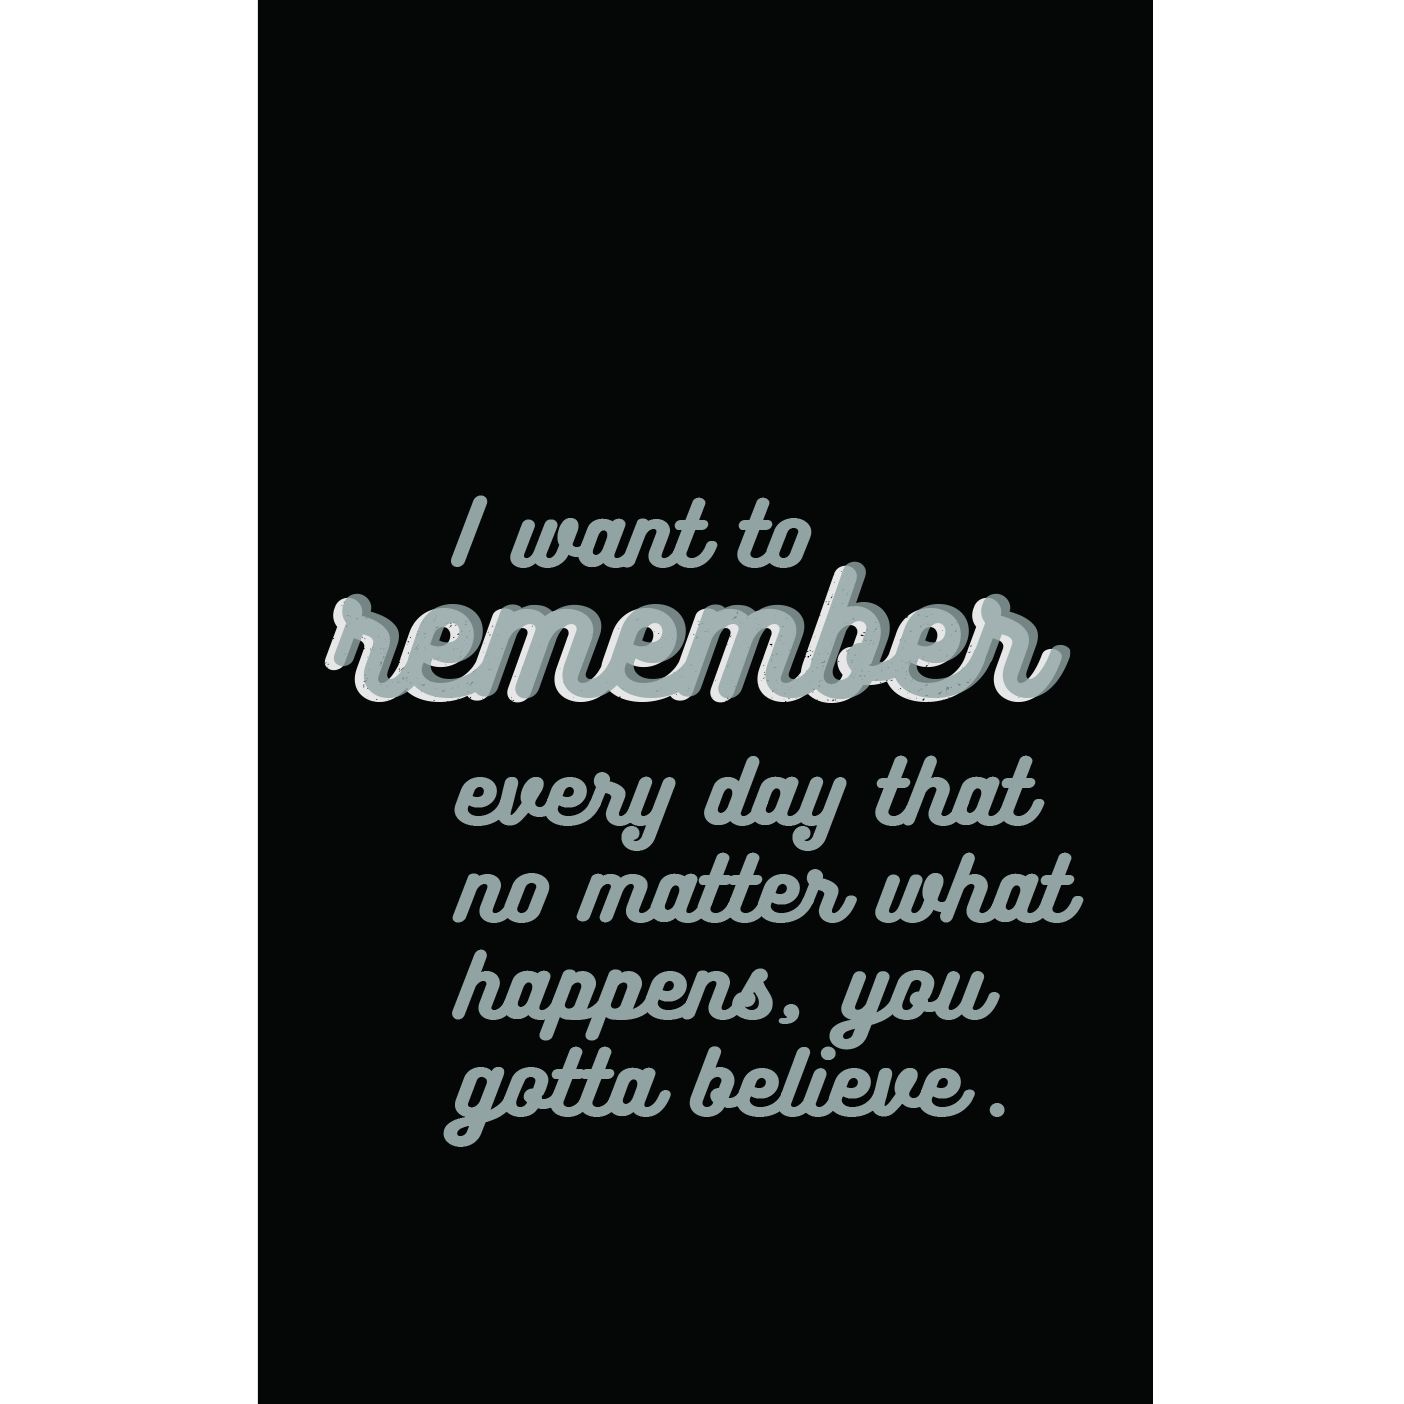 Pull quote: I want to remember every day that no matter what happens, you gotta believe.